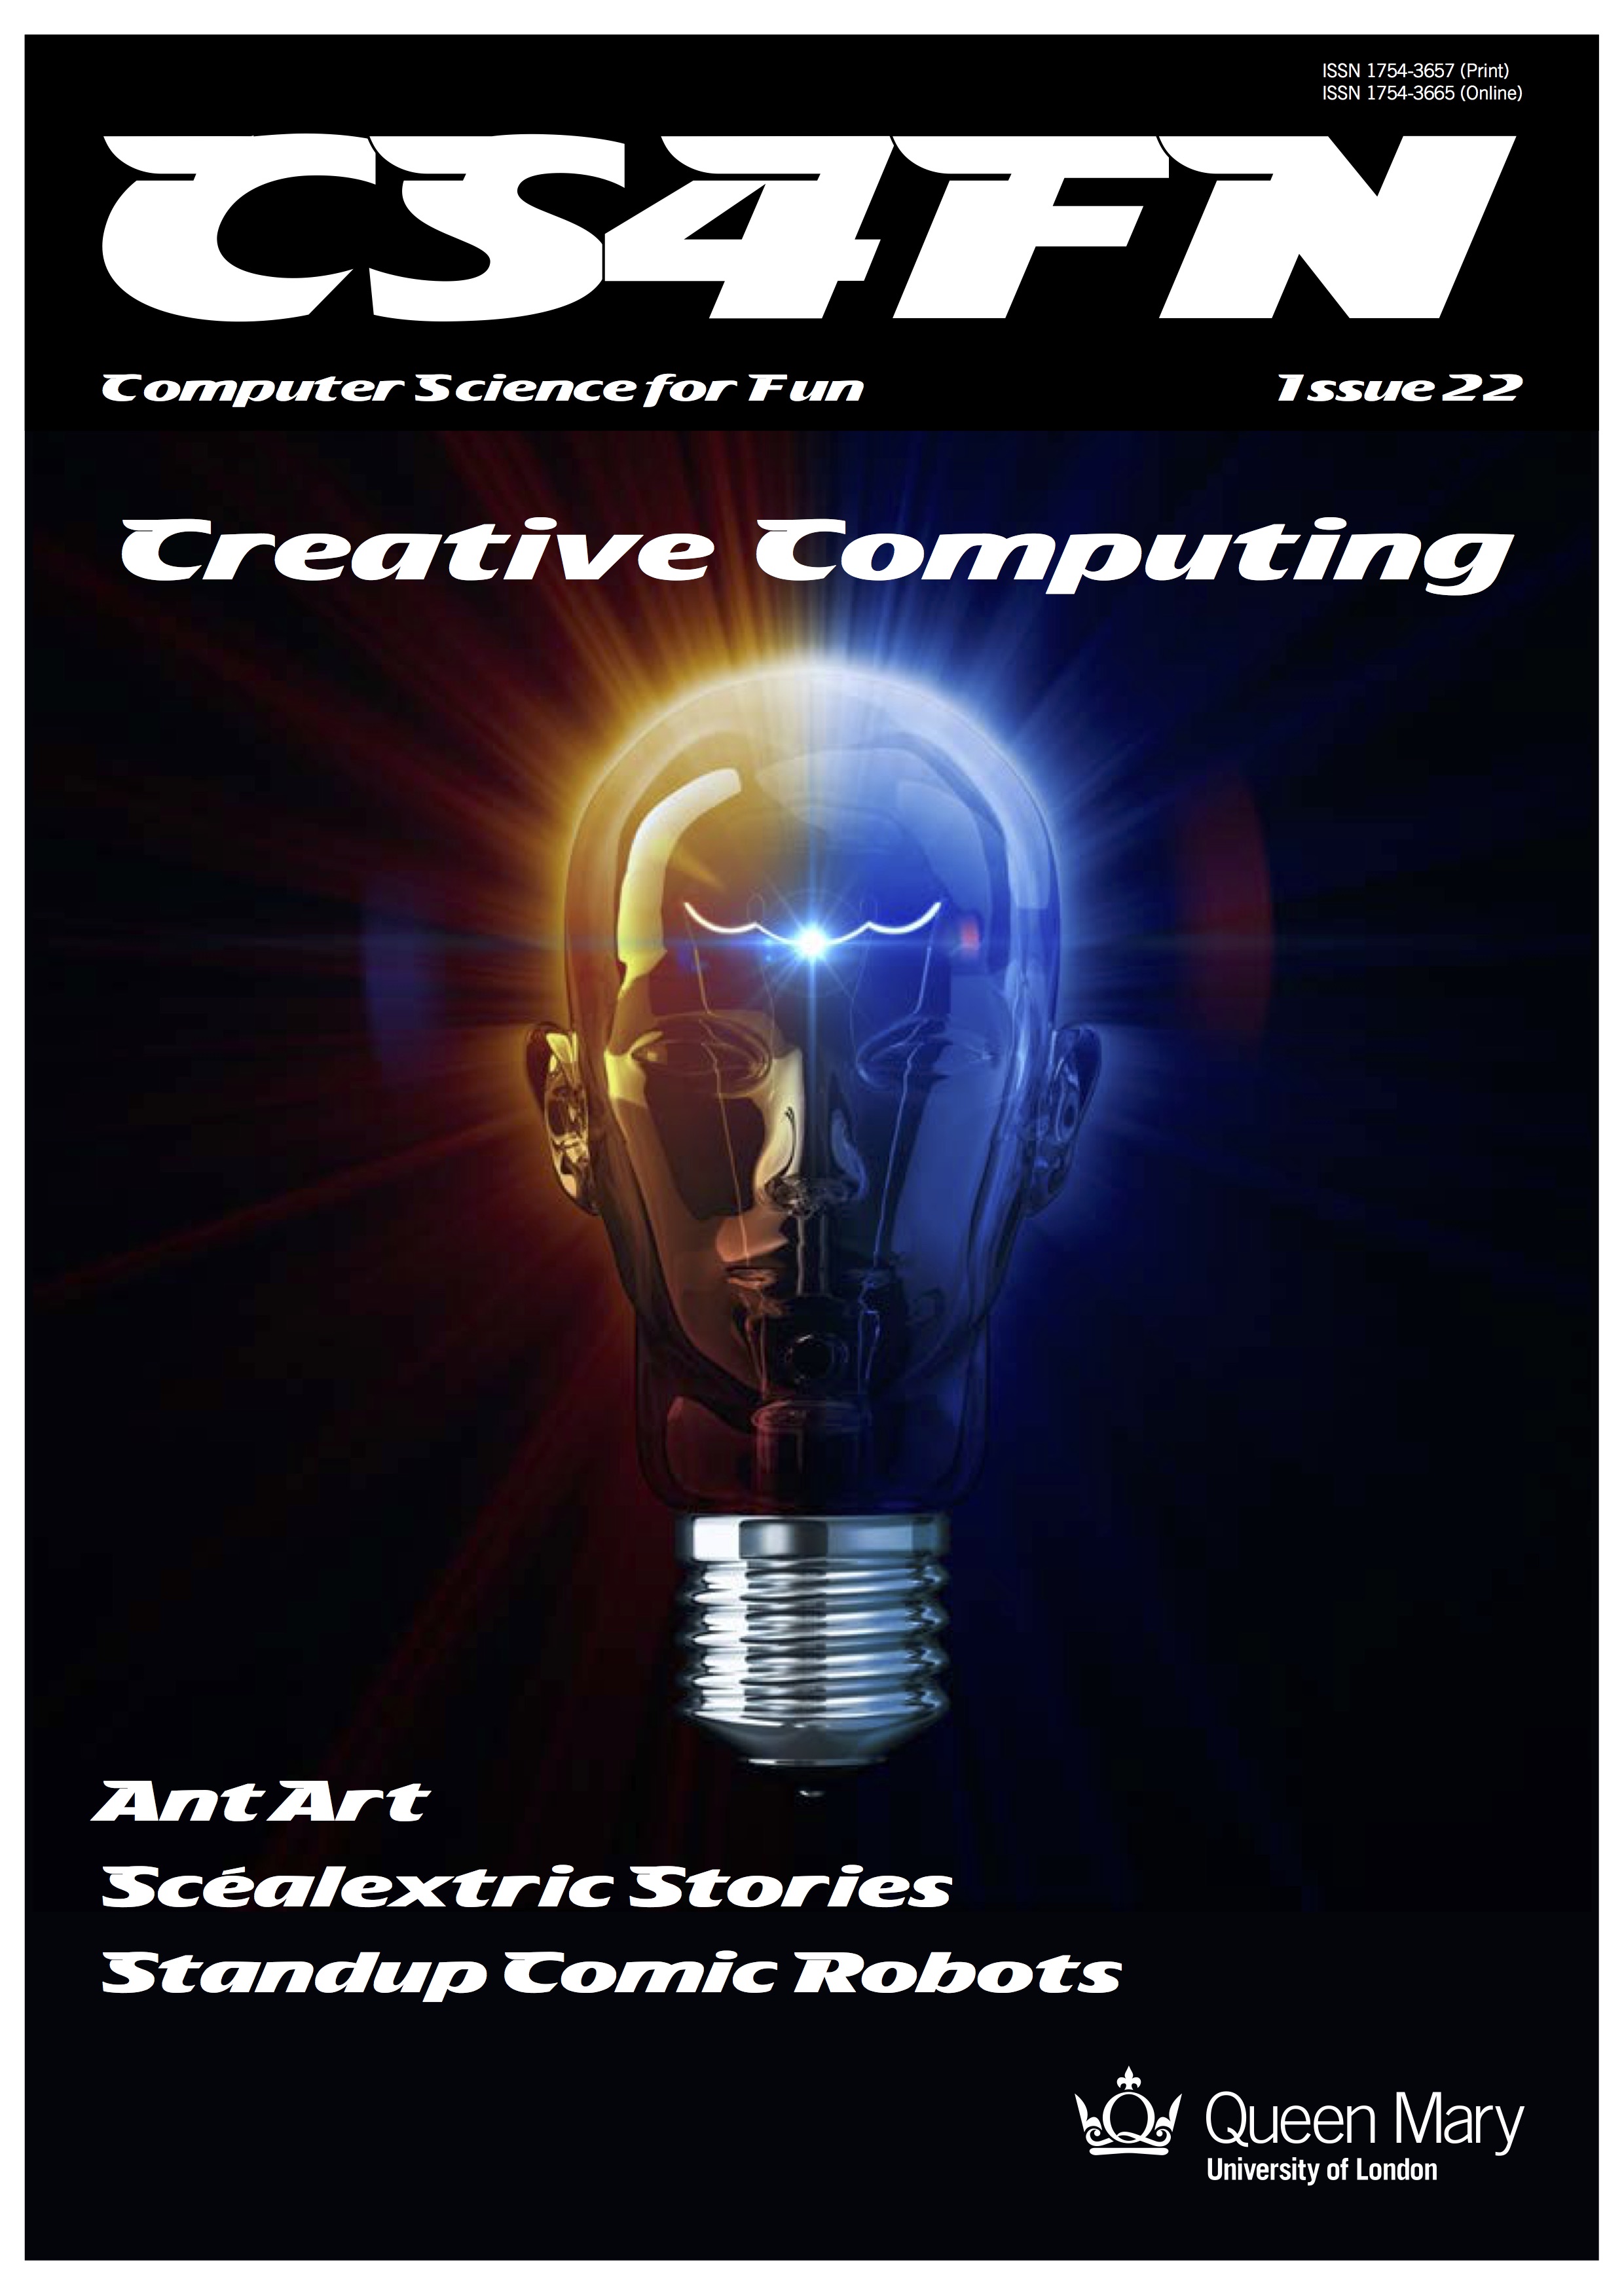 Front cover of issue 22 on Creative Computing